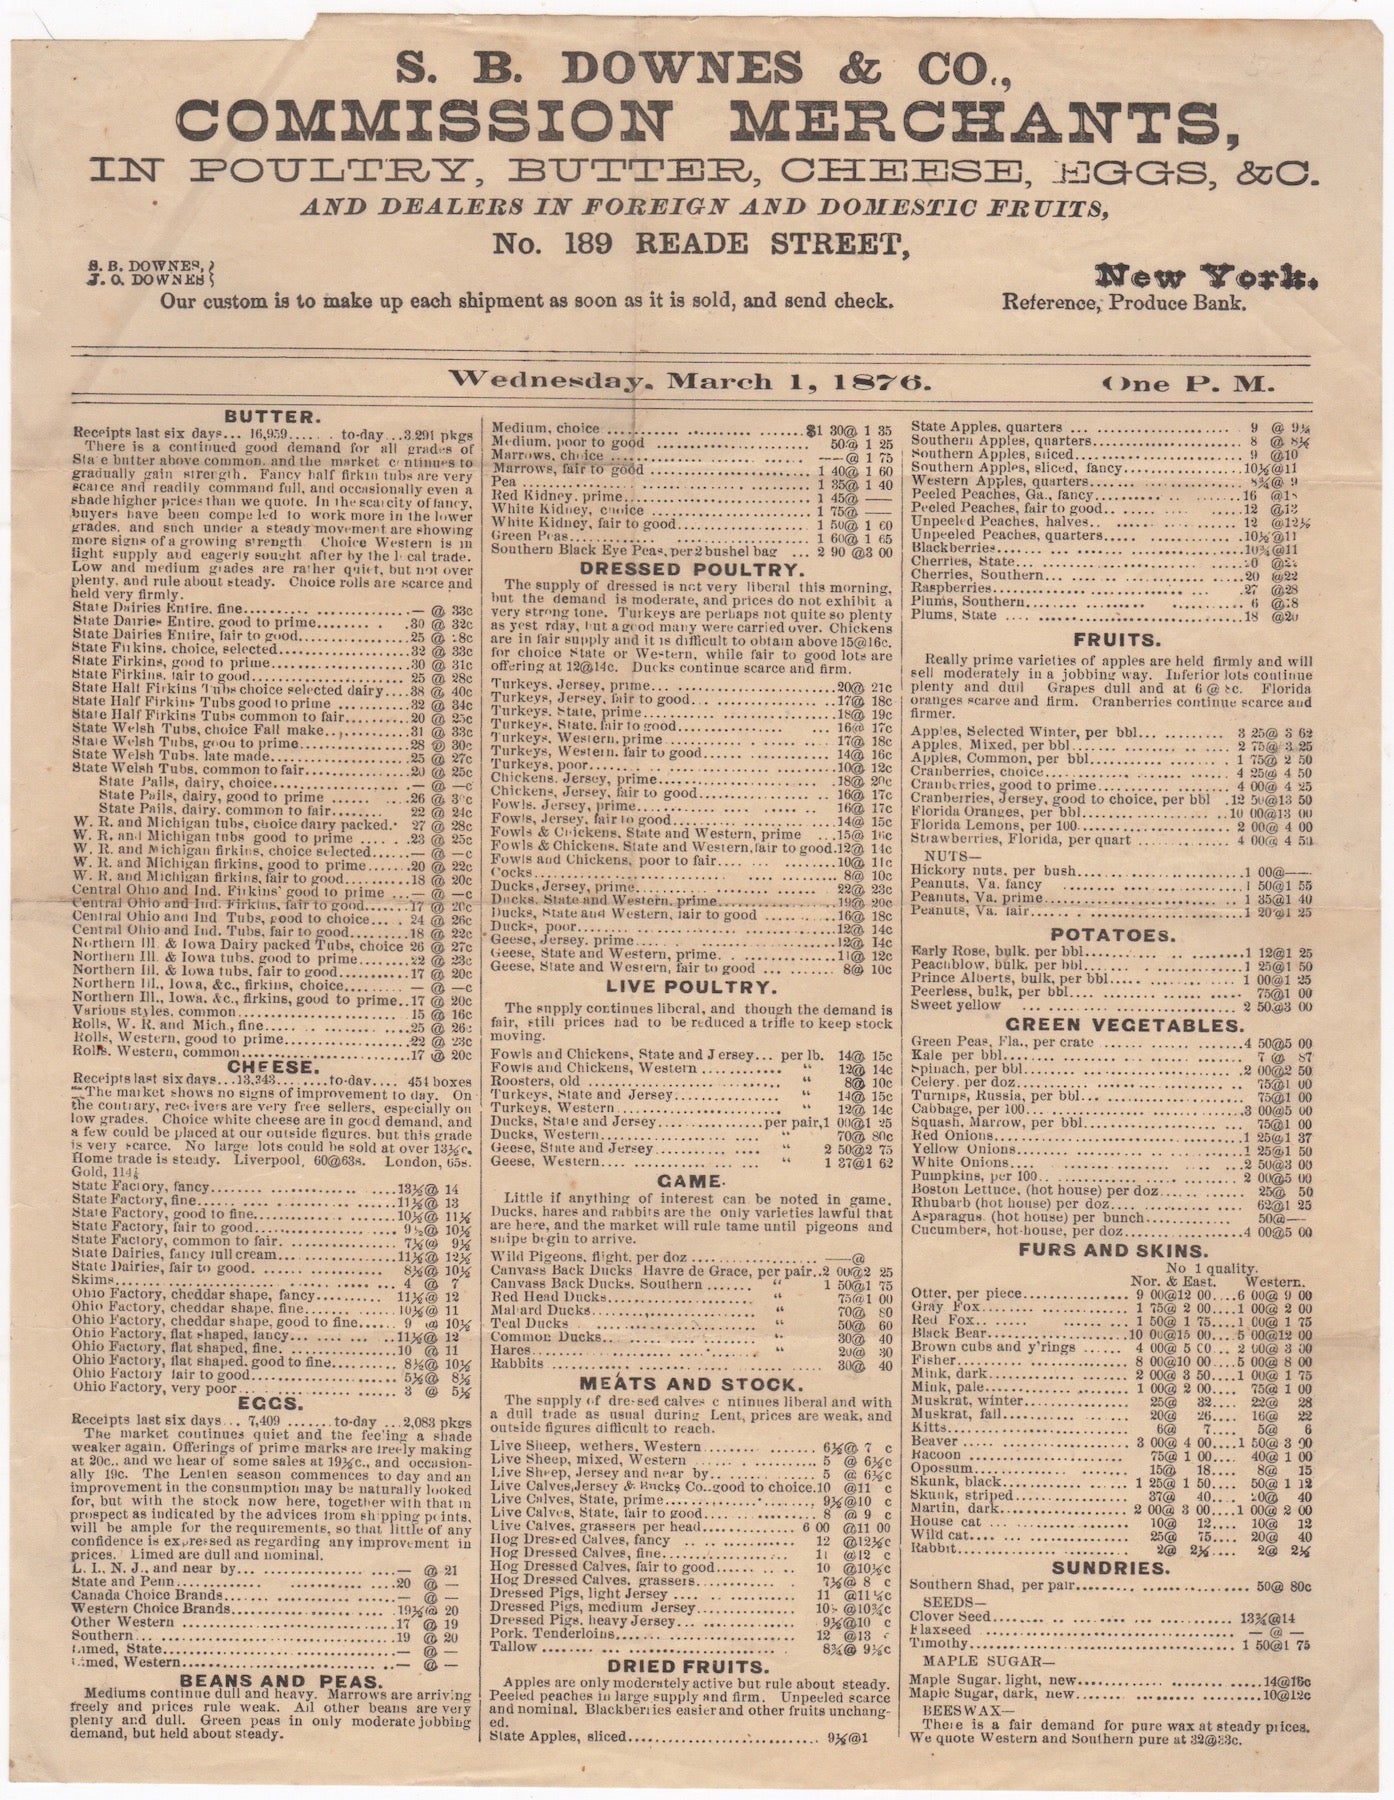 [Produce Merchants. New York] S.B. Downes & Co - [Price Sheet] S.B. Downes & Co. Commission Merchants, in Poultry, Butter, Cheese, Eggs, &C